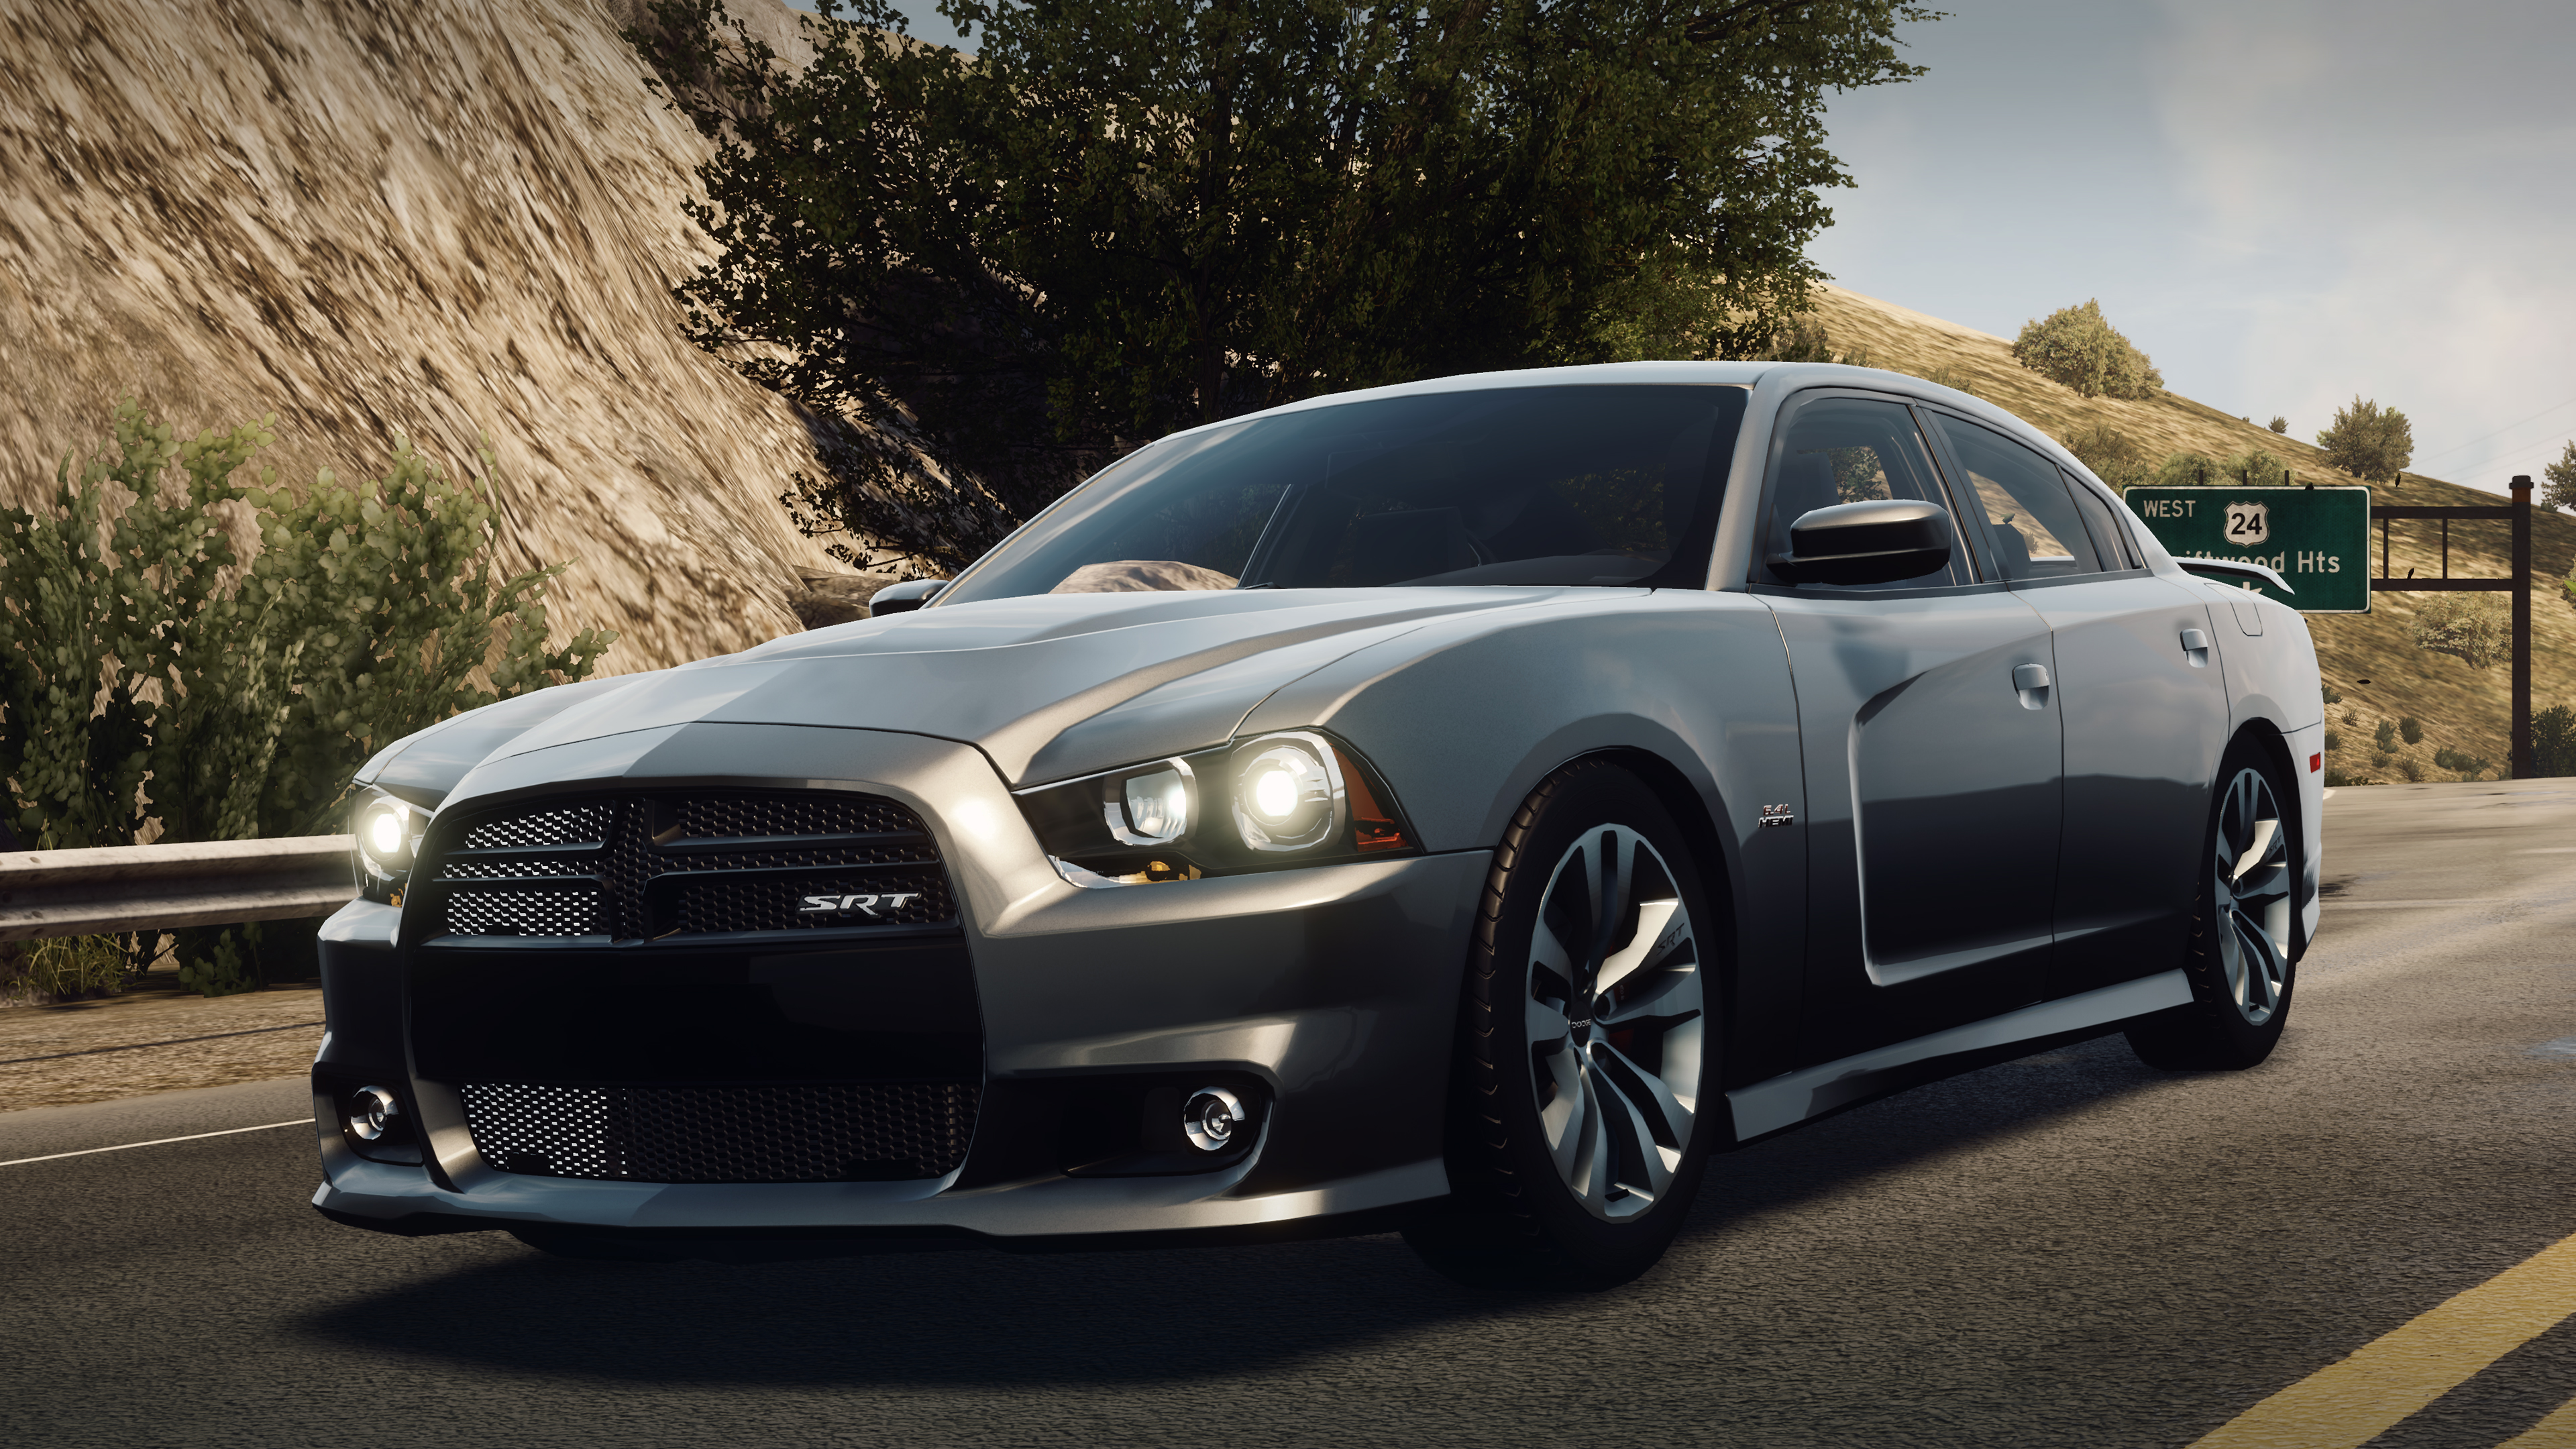 Dodge Charger SRT8 (LD) | Need for Speed Wiki | Fandom